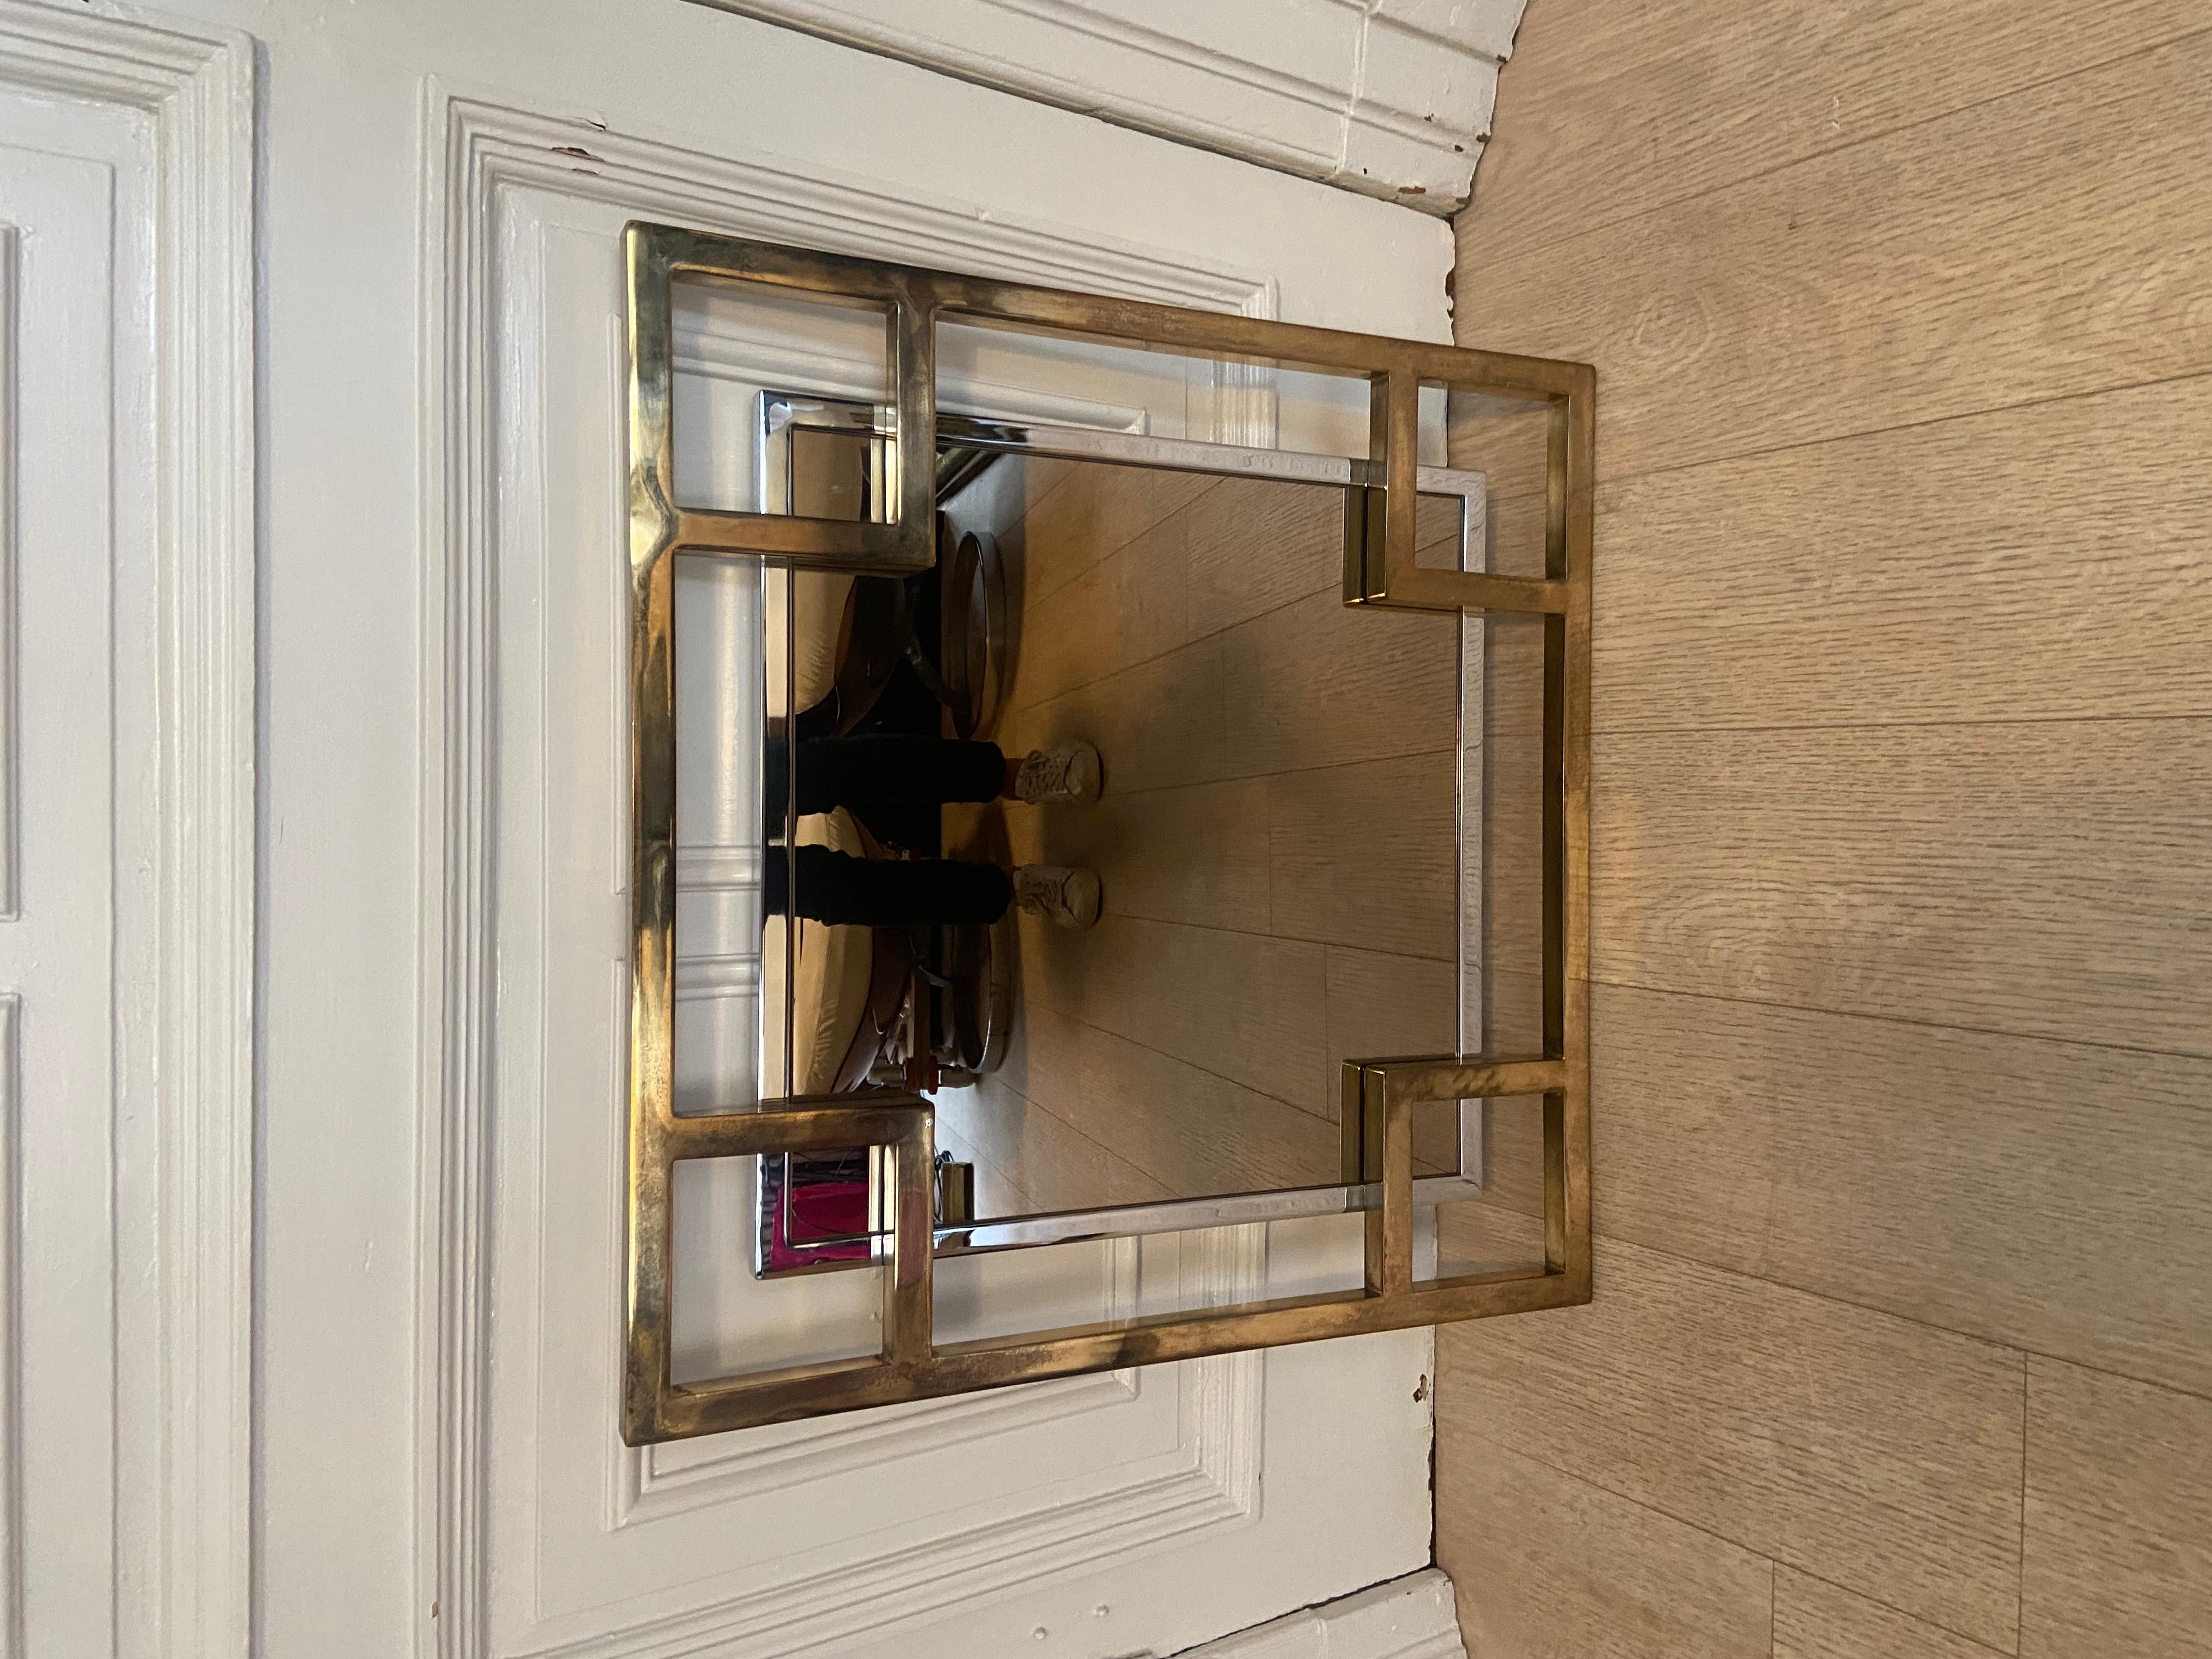 Art deco inspired mirror produced by the belgo chrom factory in the 1970s. Gold and chrome metal. Smoked mirror.
 